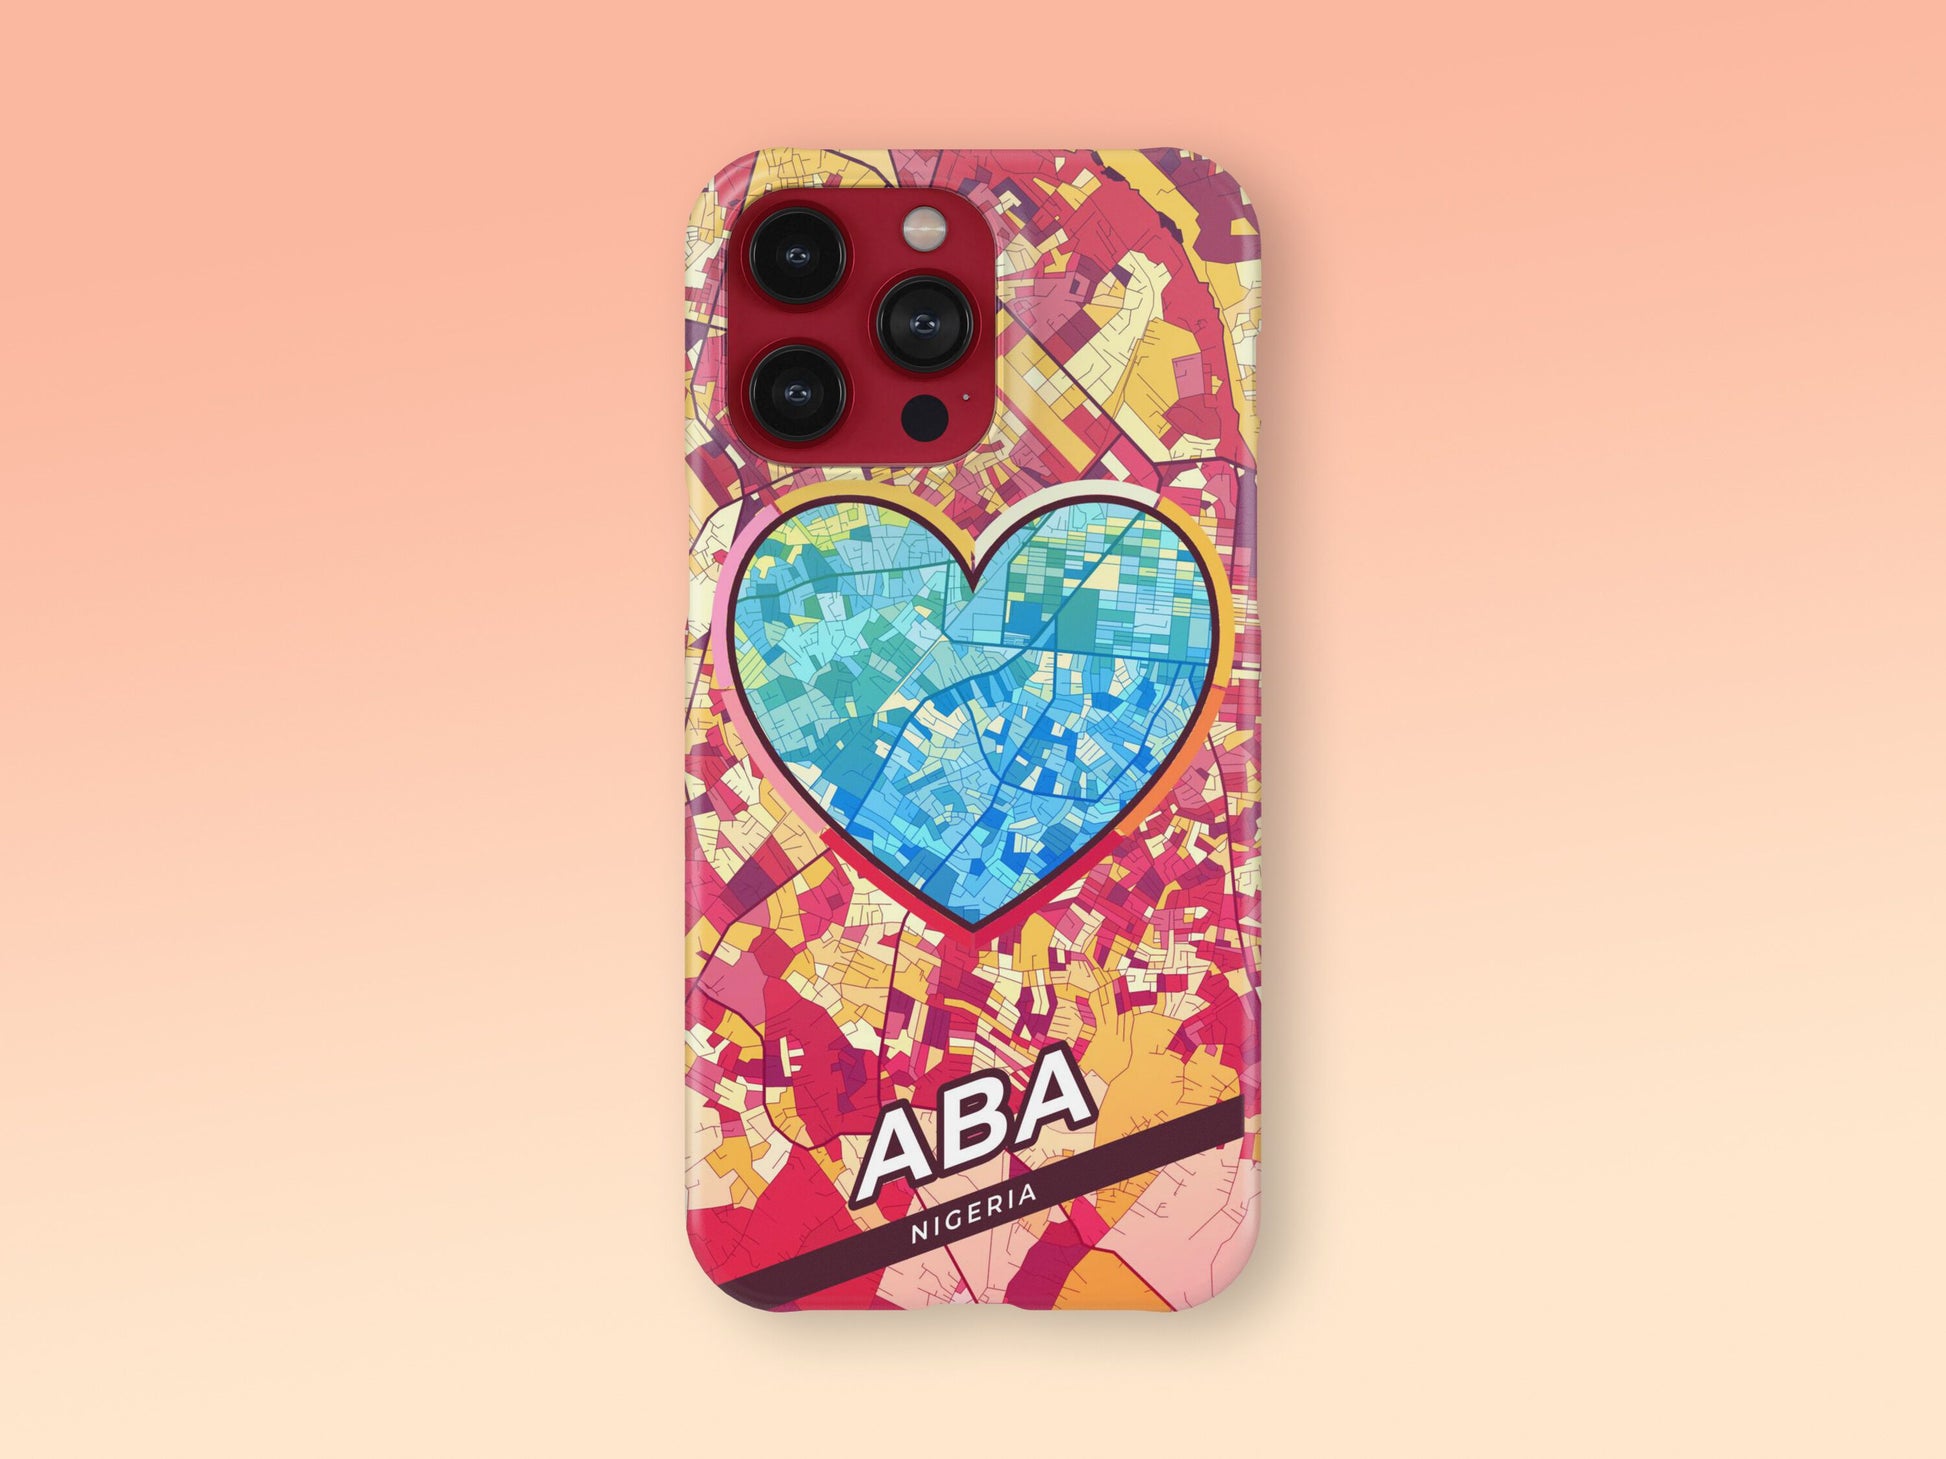 Aba Nigeria slim phone case with colorful icon. Birthday, wedding or housewarming gift. Couple match cases. 2